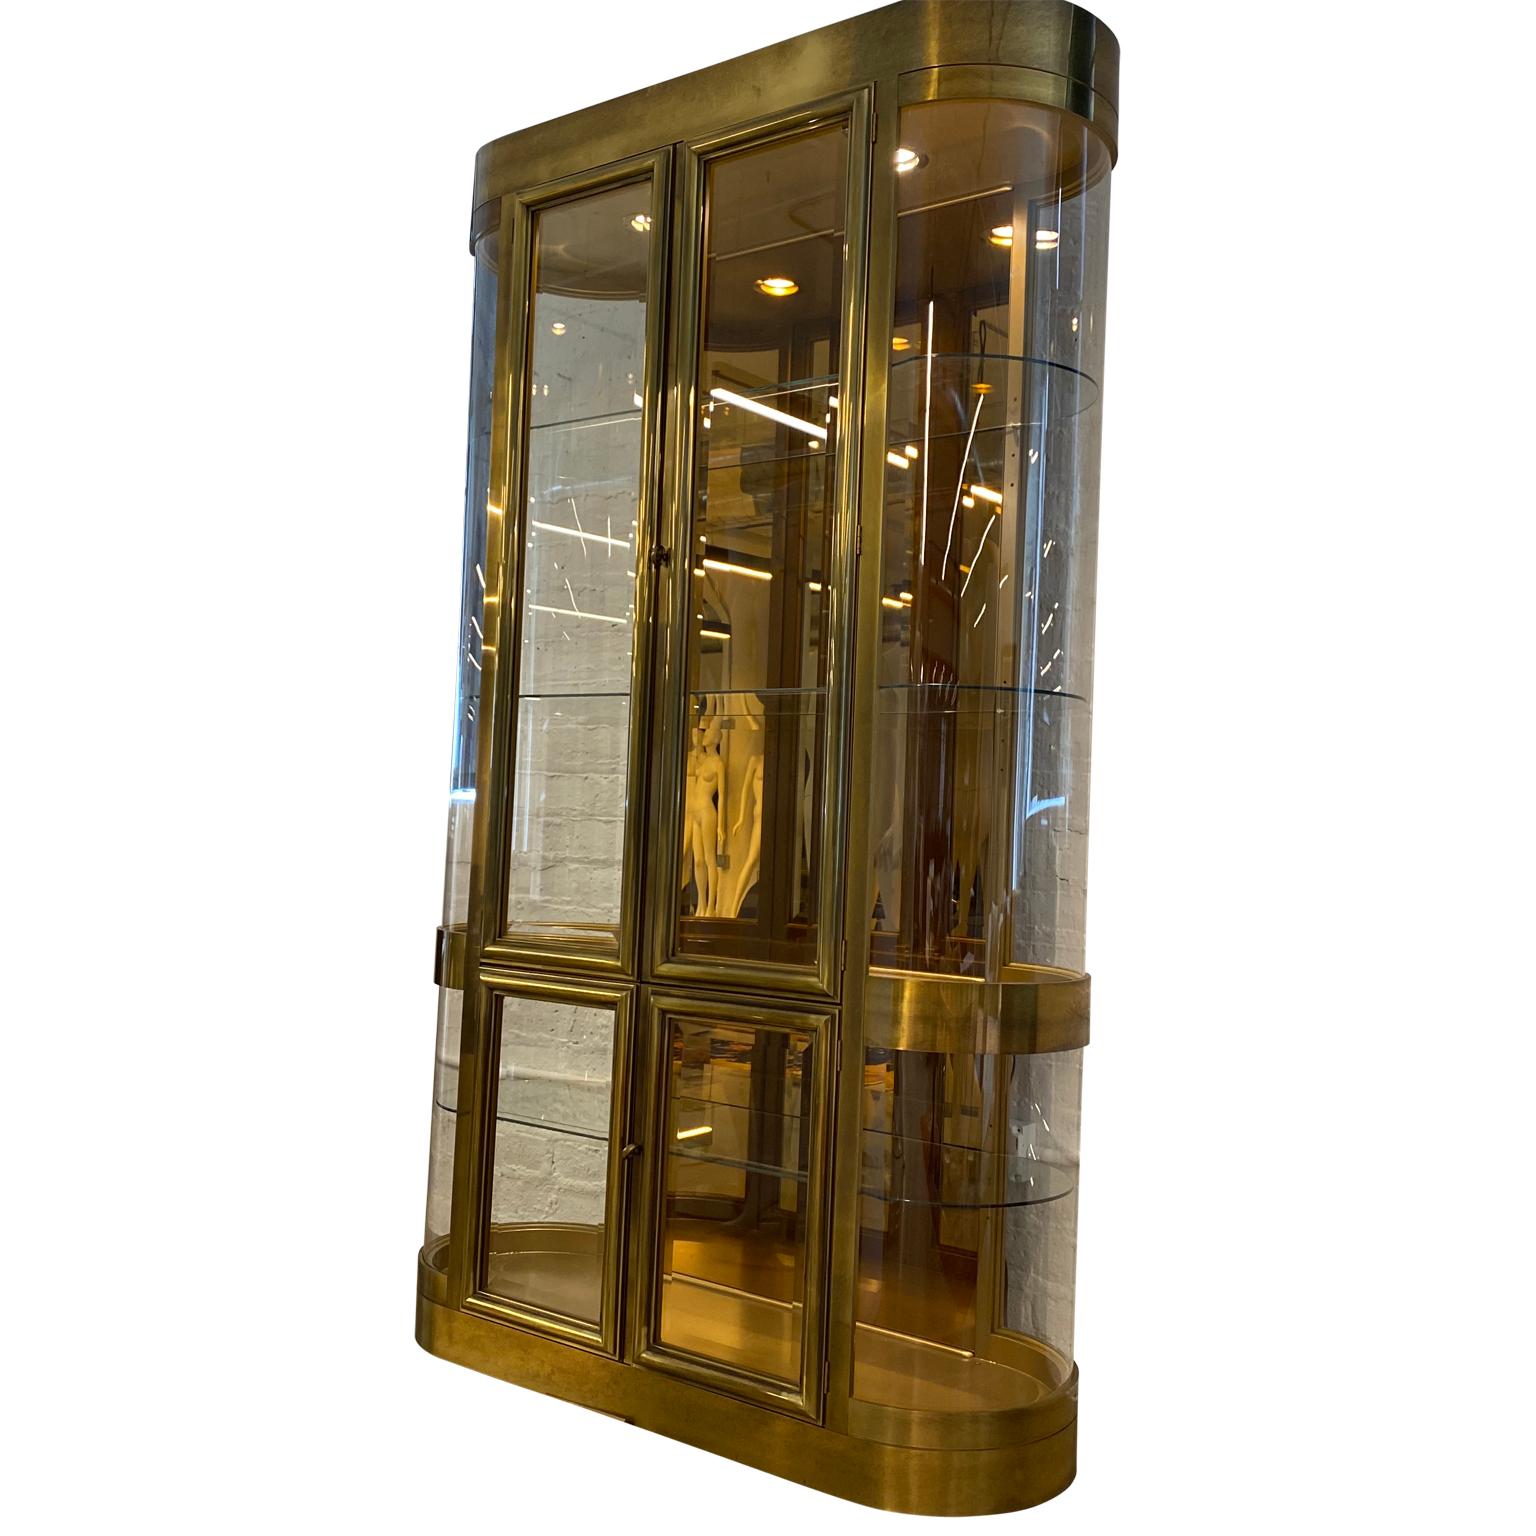 Rare single Mastercraft brass vitrine display cabinet with curved Lucite sides and with mirrored back, glass shelves and locking doors. The glass panels and door have thick bevelled glass.
The vitrine has working display lighting.

The inside depth